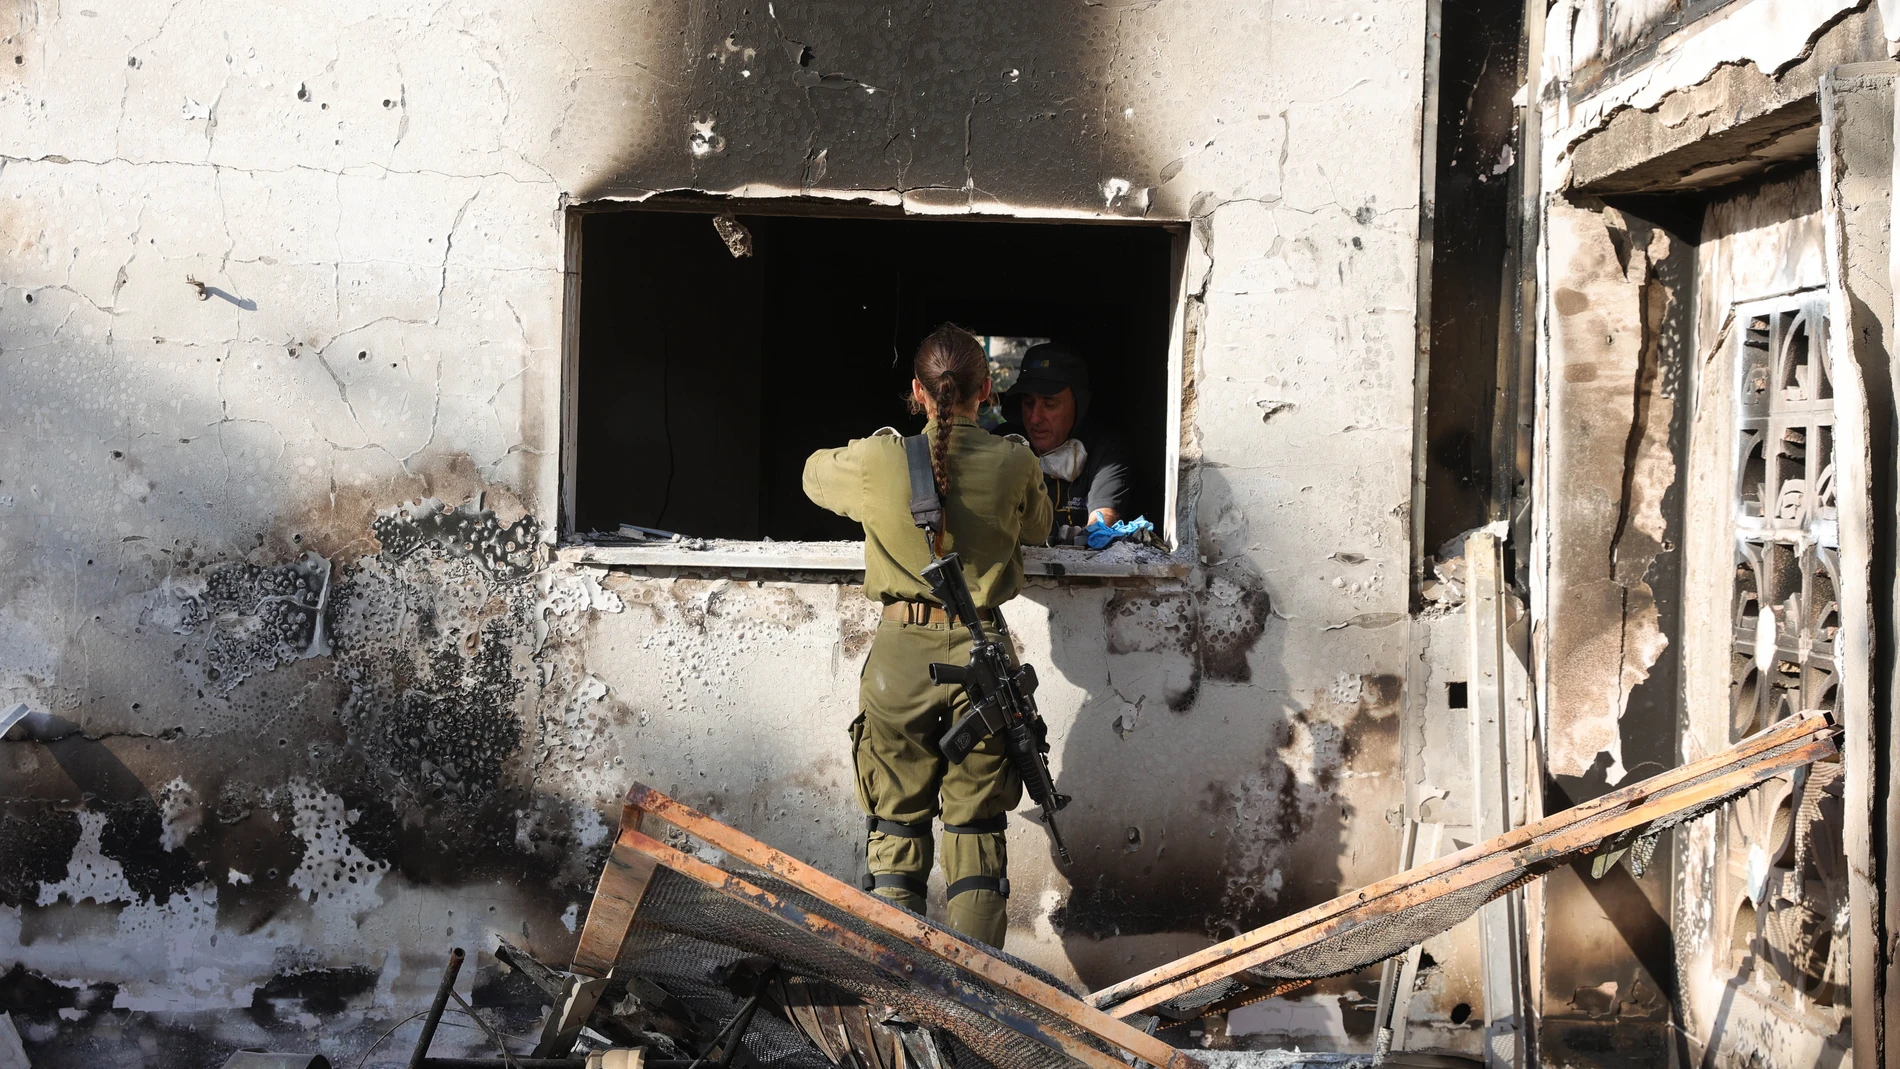 Kibbutz Beeri (Israel), 25/10/2023.- Israeli soldiers inspect a ruined house in Kibbutz Beeri, near the border with Gaza in southern Israel , 25 October 2023, where at least 130 Kibbutz members where killed by Hamas as militants launched an attack against Israel from the Gaza Strip on 07 October. More than 5,500 Palestinians and over 1,400 Israelis have been killed, according to the Israel Defense Forces (IDF) and the Palestinian health authority, since Hamas militants launched an attack agai...